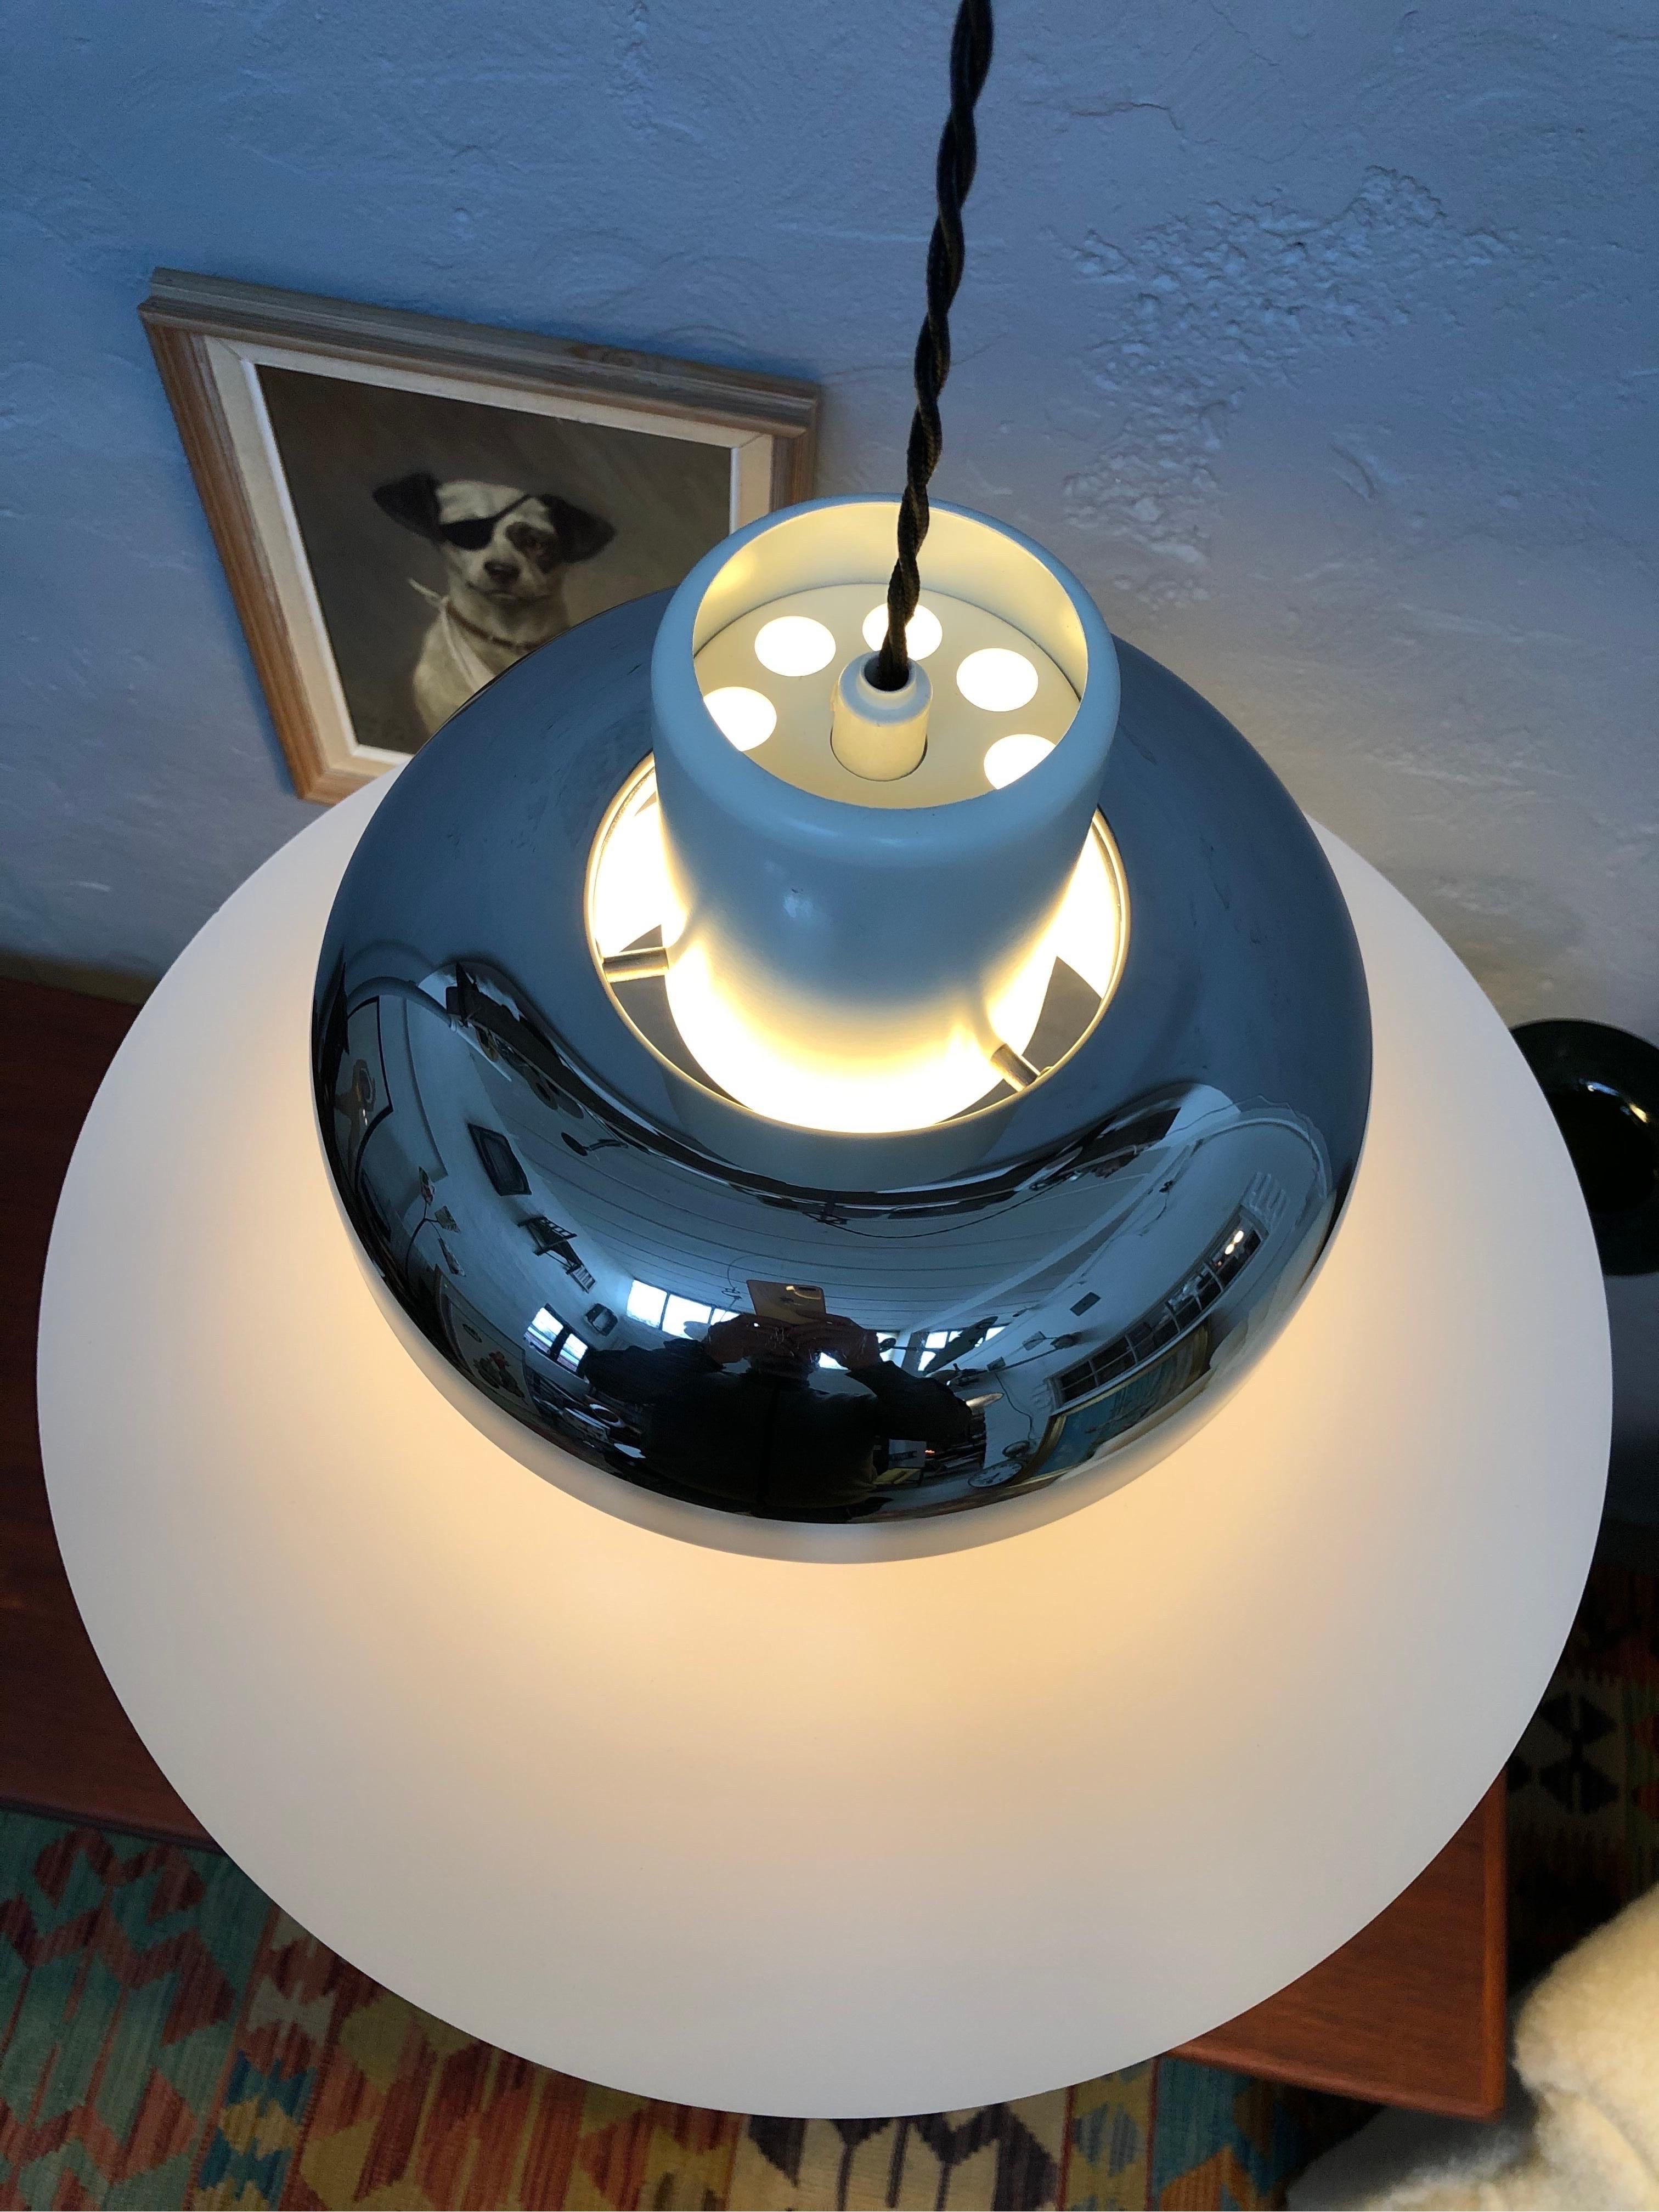 Vintage Andreas Hansen Mandalay Pendant Lamp In Good Condition For Sale In Søborg, DK